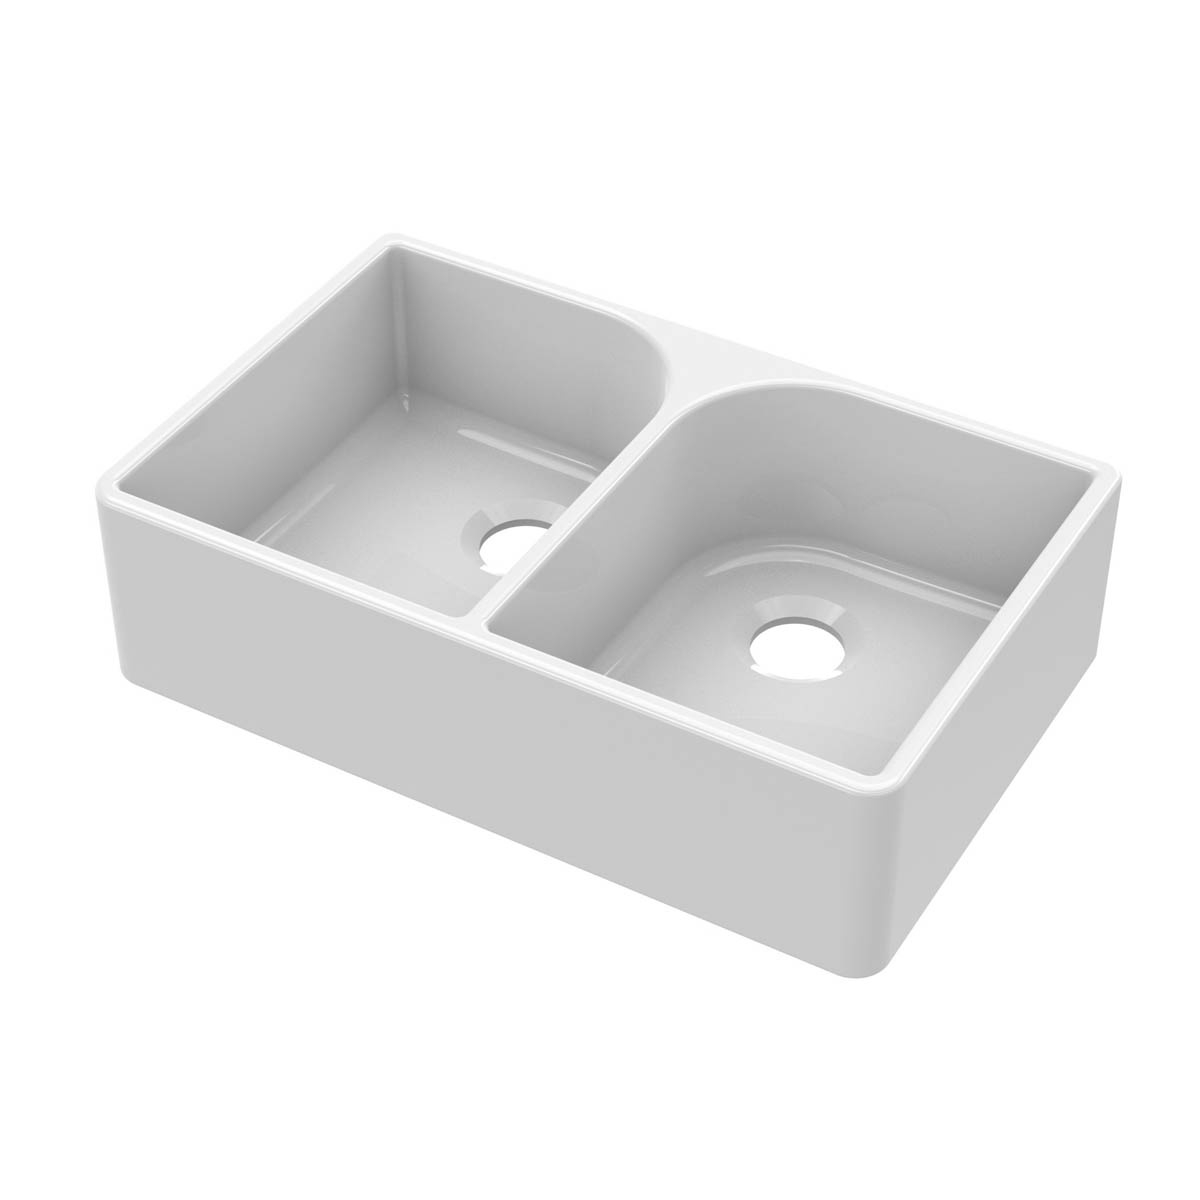 Nuie Butler Double Bowl 795x500x220mm Fireclay Sink with Full Weir - White (20292)